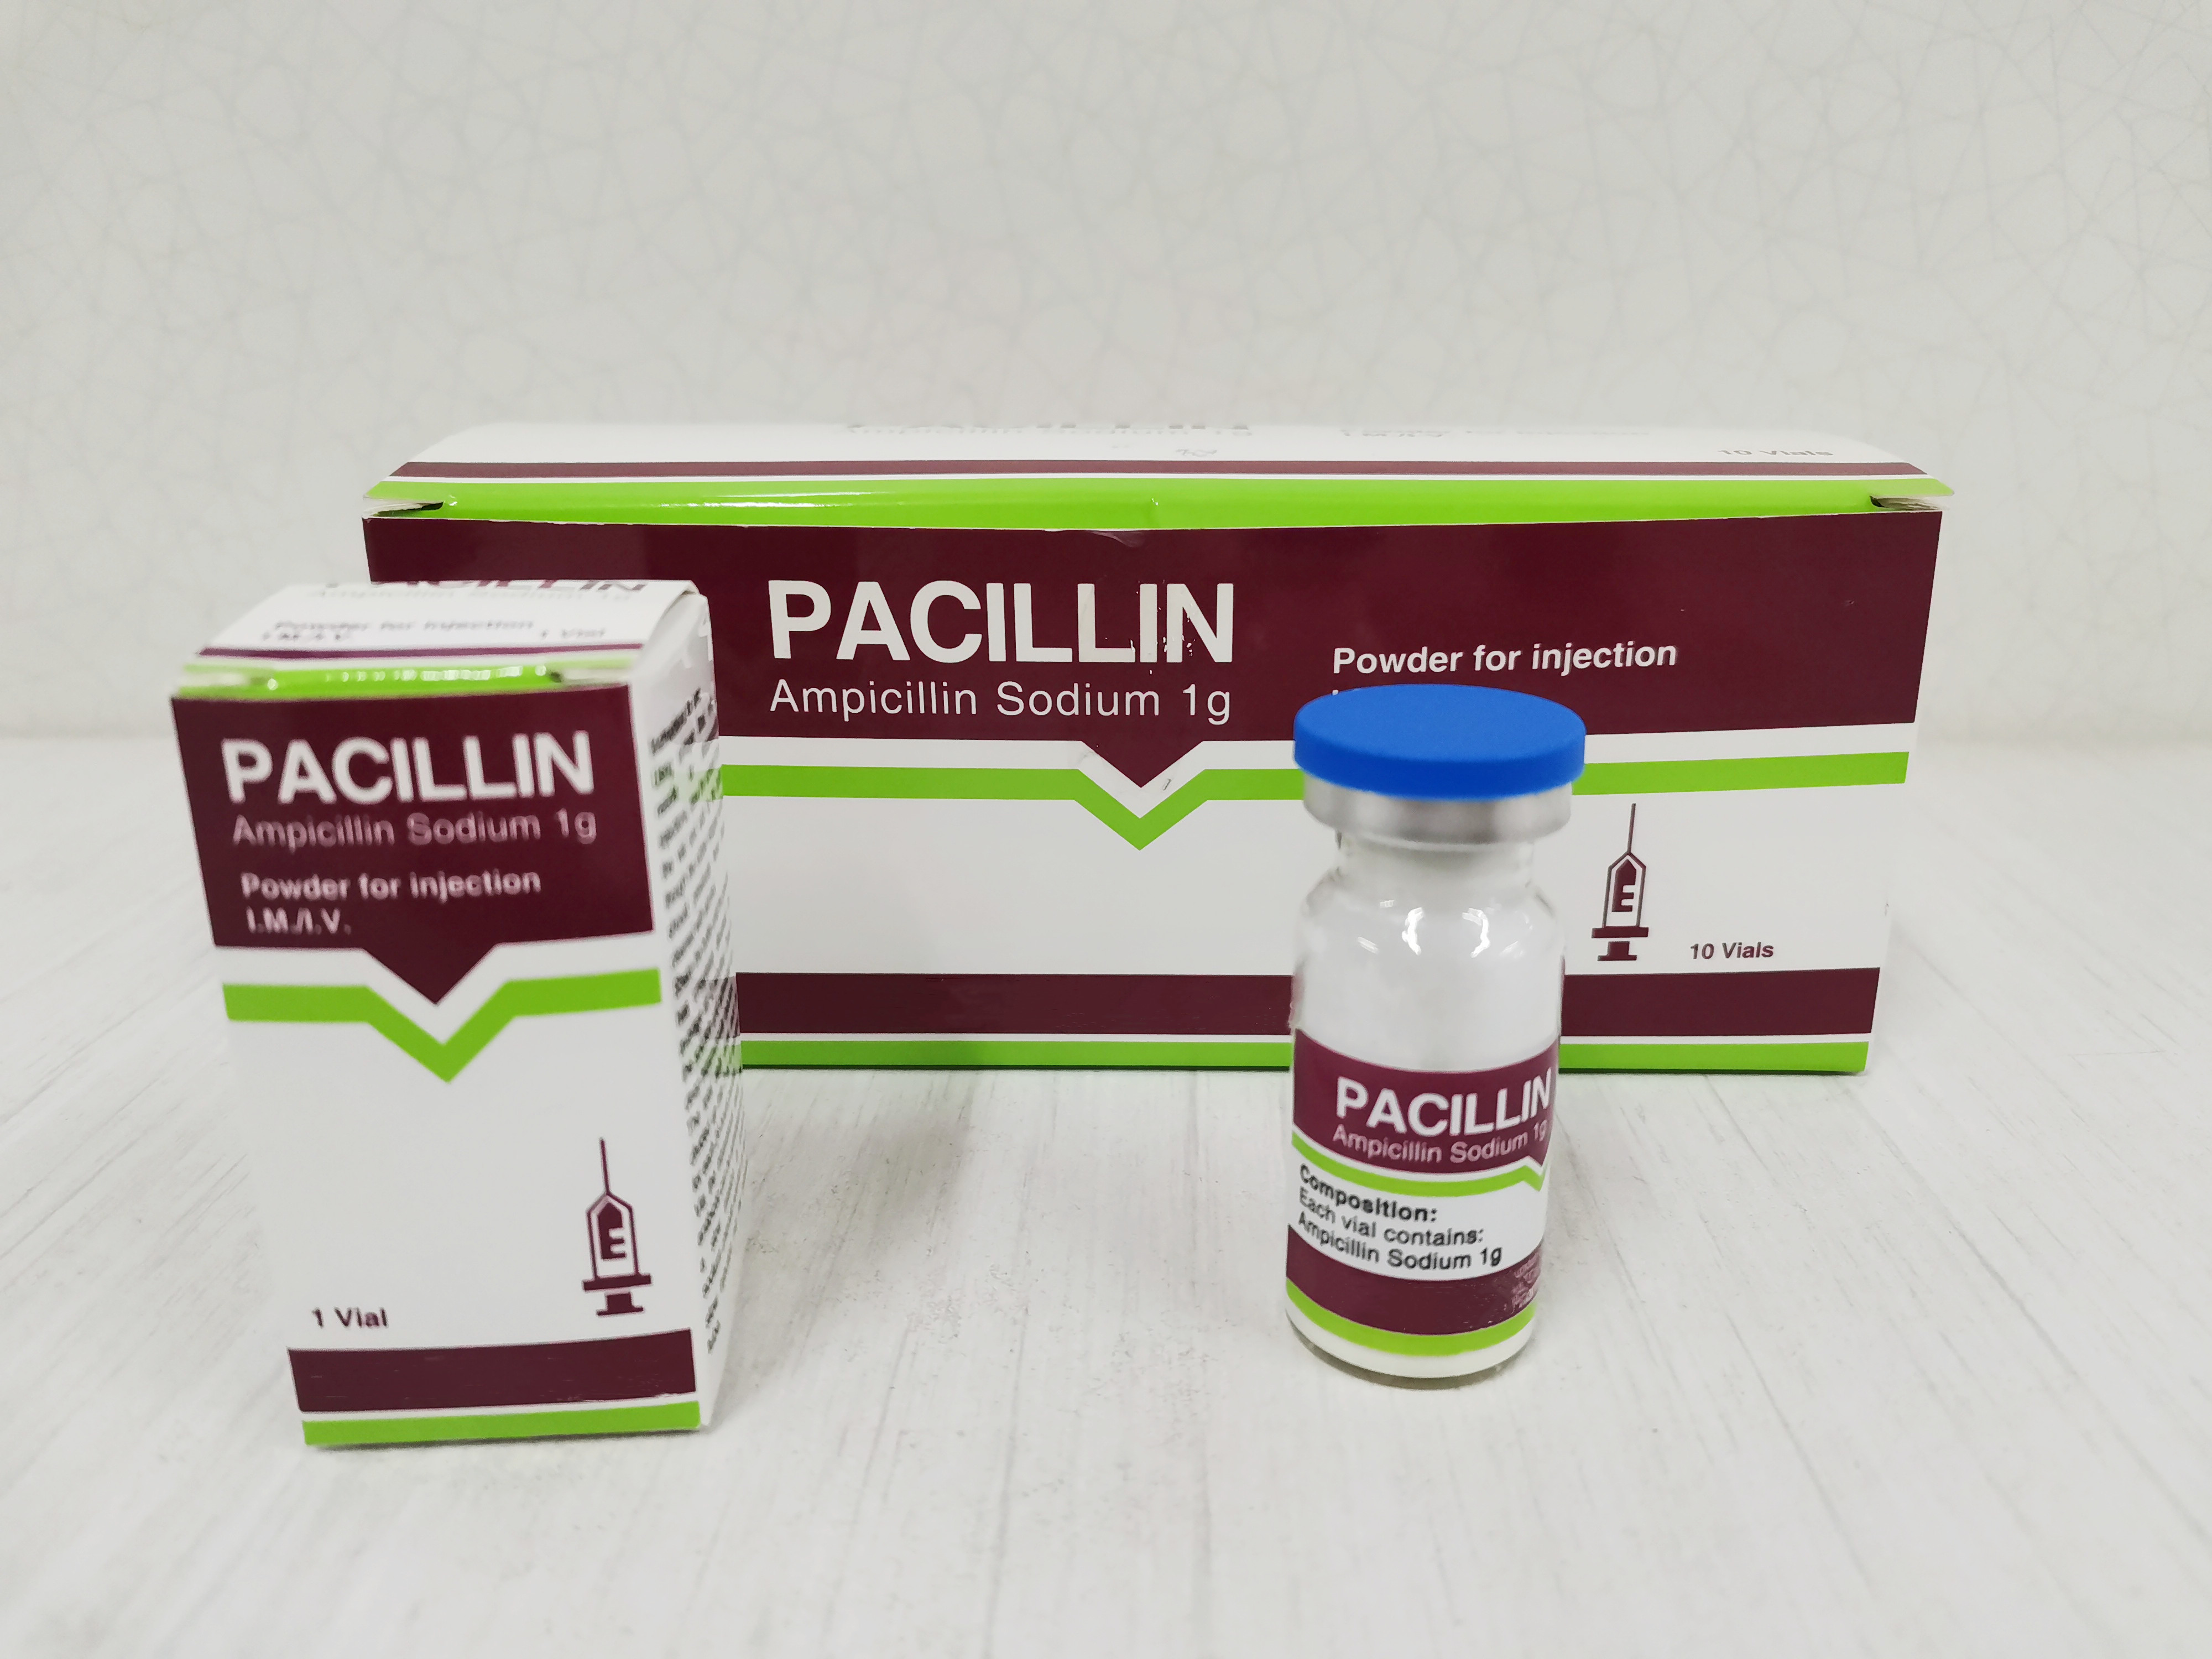 Ampicillin is an effective drug in the treatment of bacterial infections